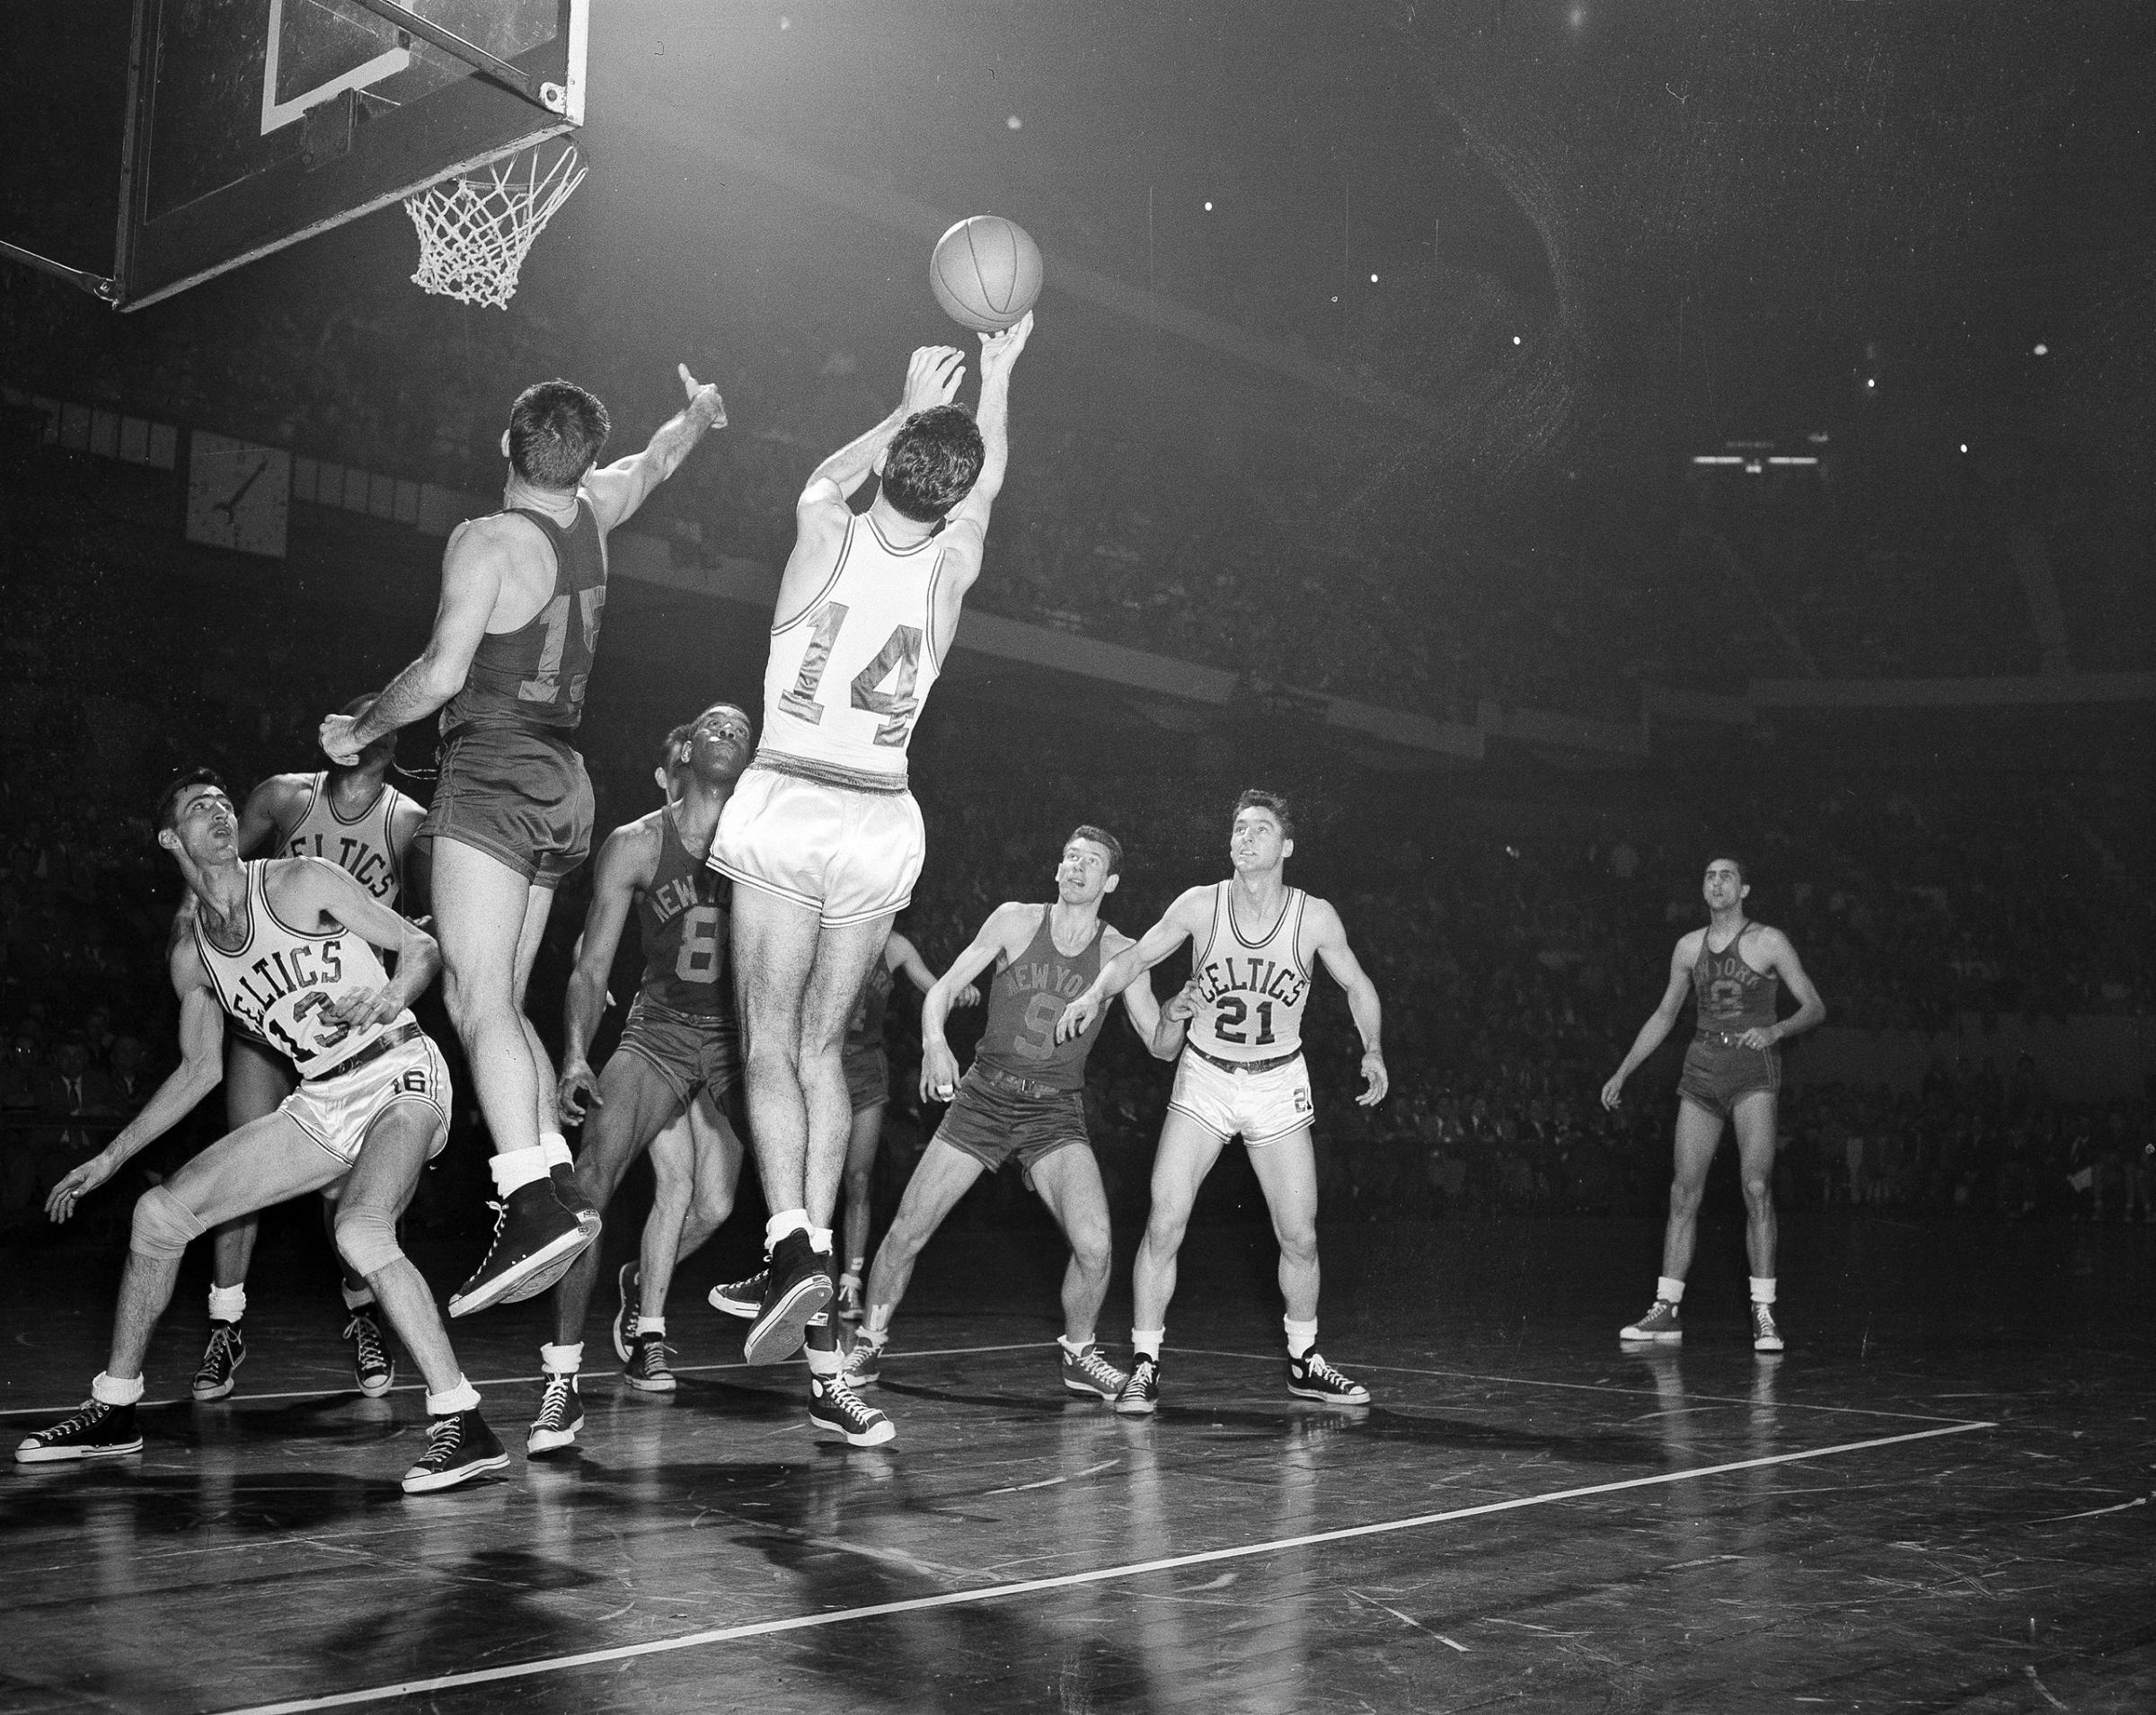 Bob Cousy (14) of the Boston Celtics takes a rebound off the backboard after an attempted basket by Dick McGuire (15) of the New York Knickerbockers in the fourth quarter of their NBA playoff game at the Boston Garden in Boston, Mass., March 26, 1953.